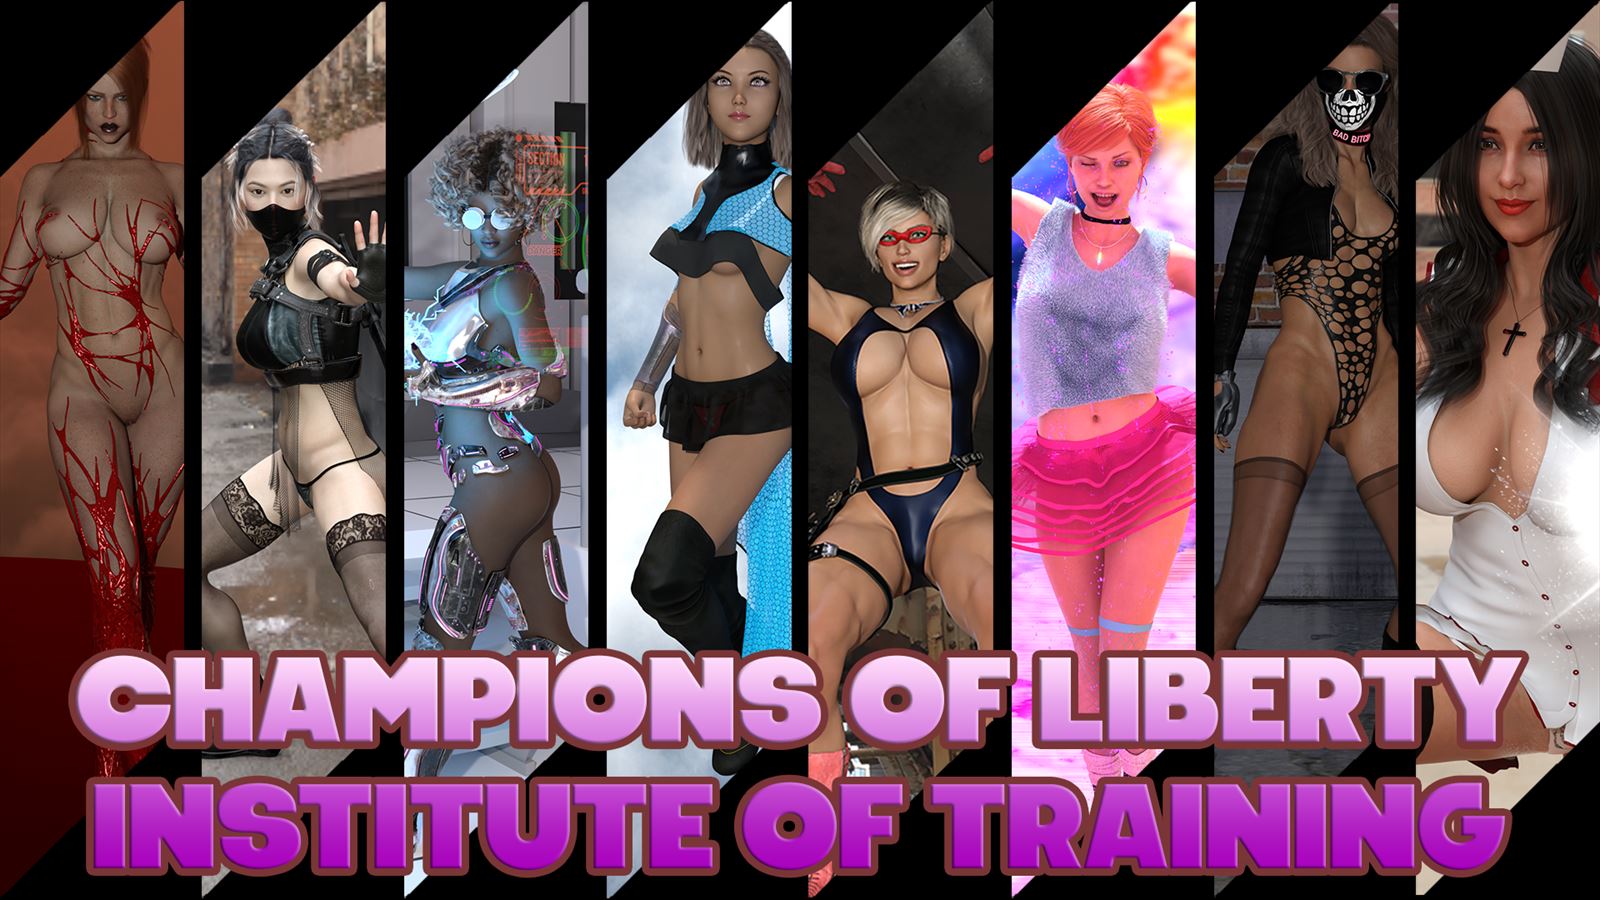 Champions of Liberty Institute of Training porn xxx game download cover